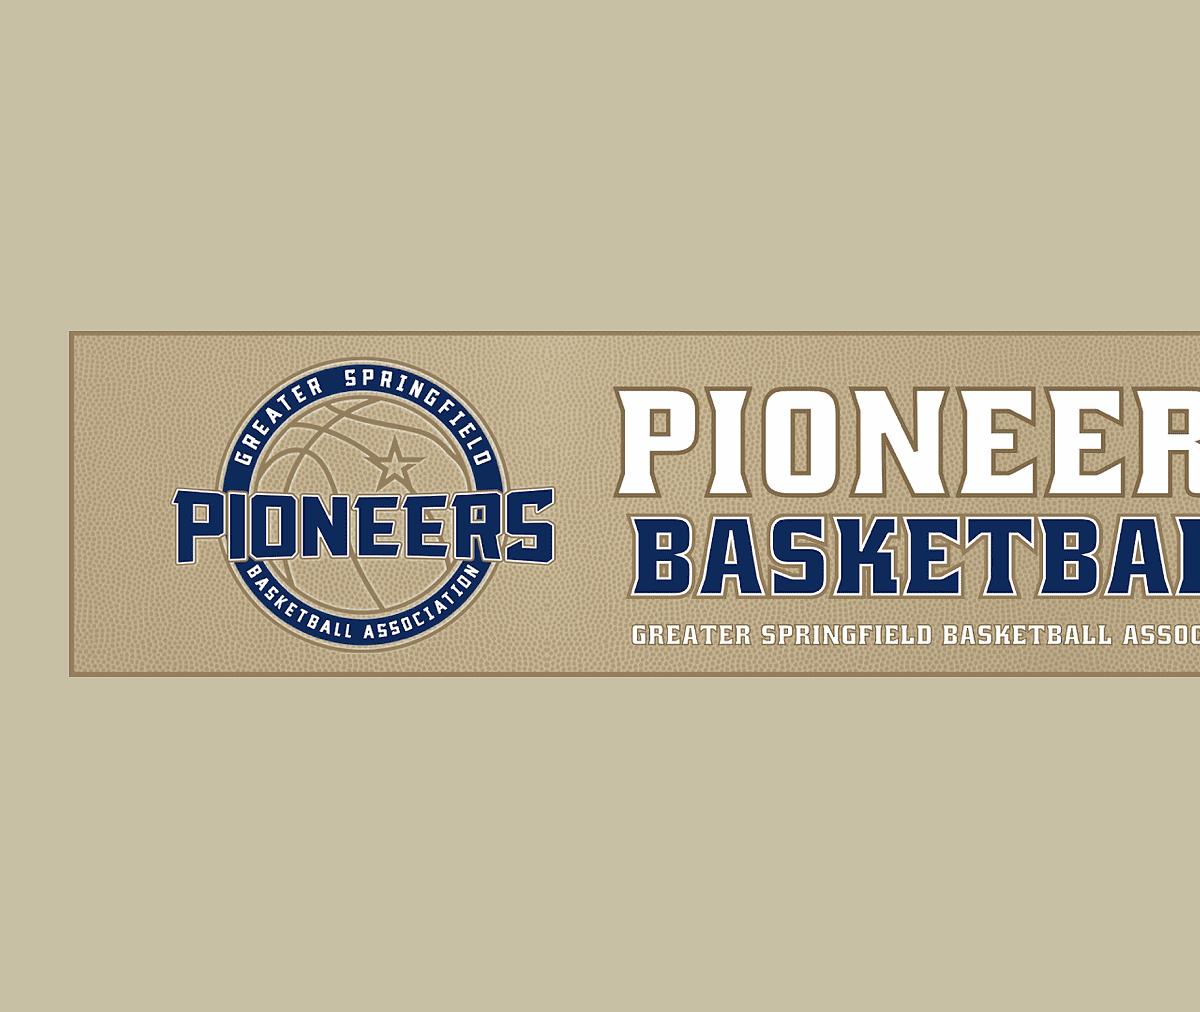 Pioneers Basketball 'Activating in April' The Greater Springfield Times